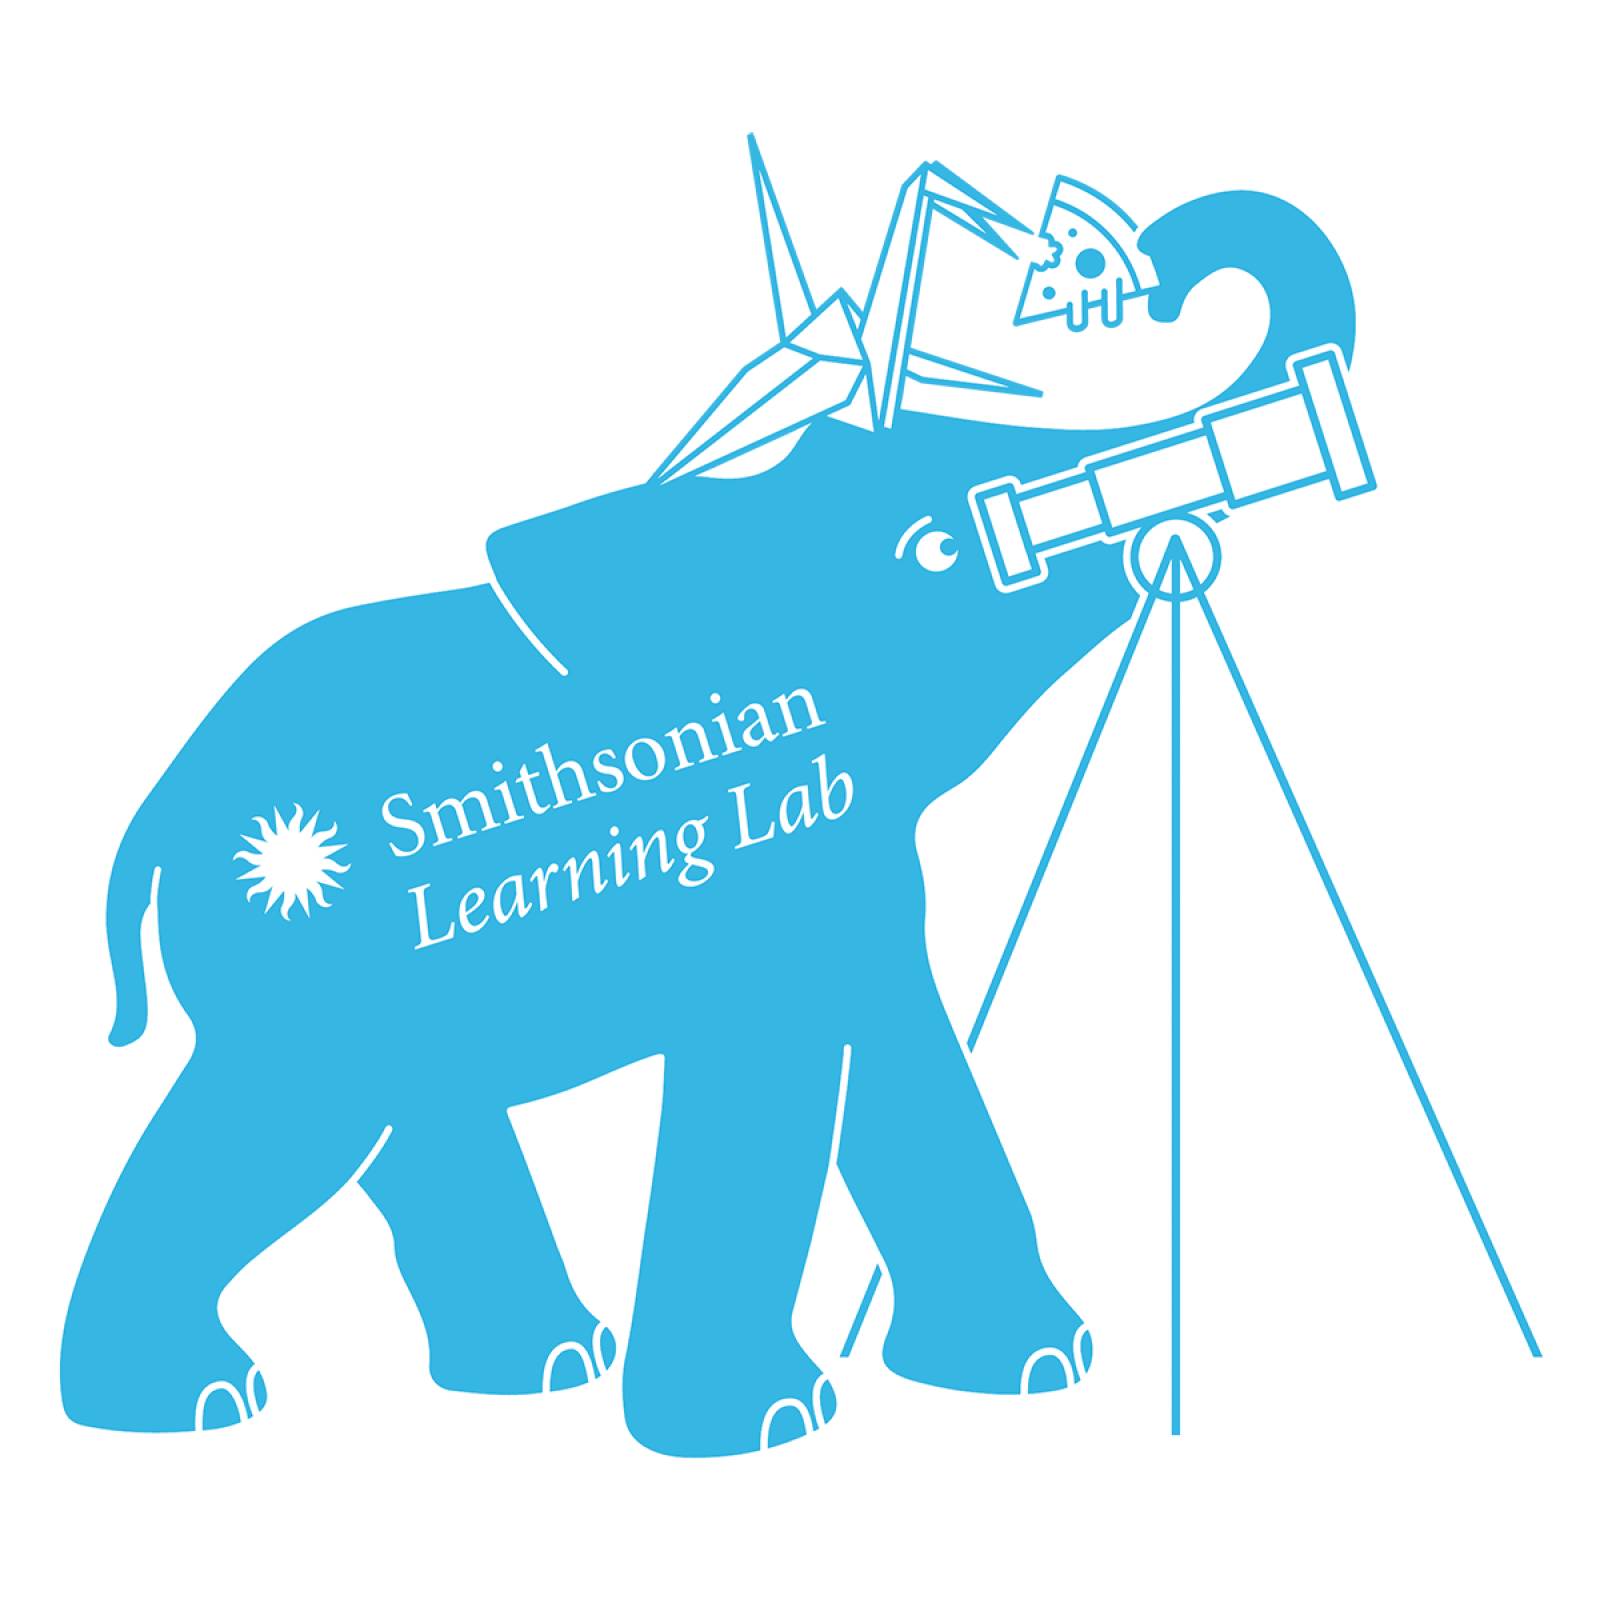 the learning lab